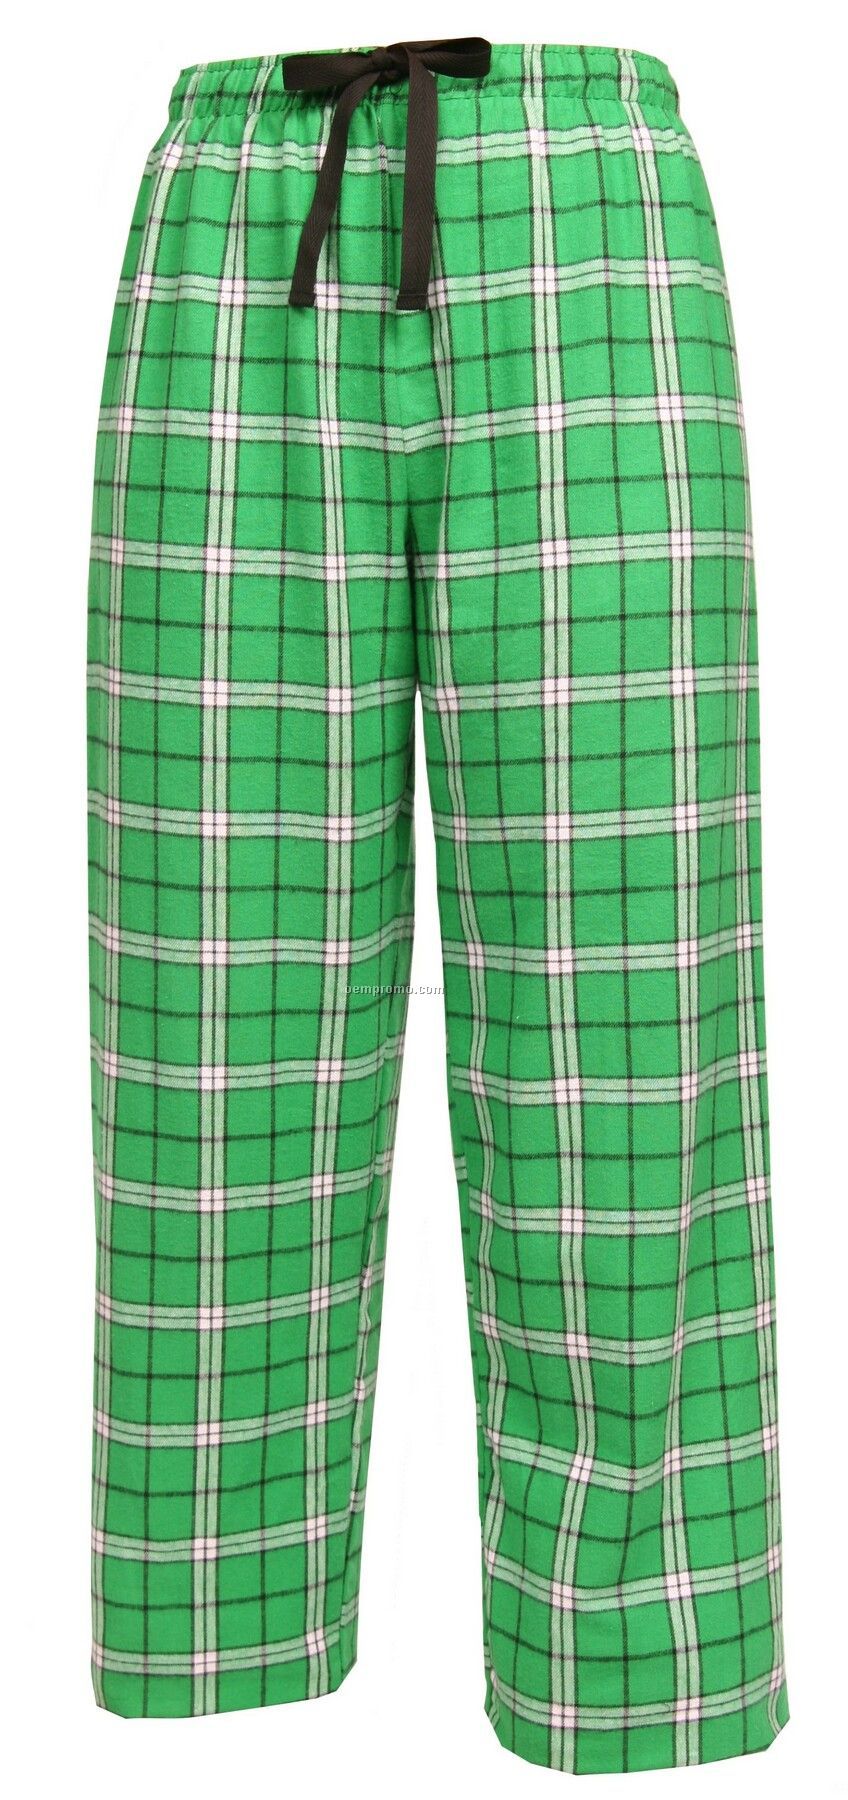 Youth Team Pride Flannel Pant In Kelly Green & White Plaid